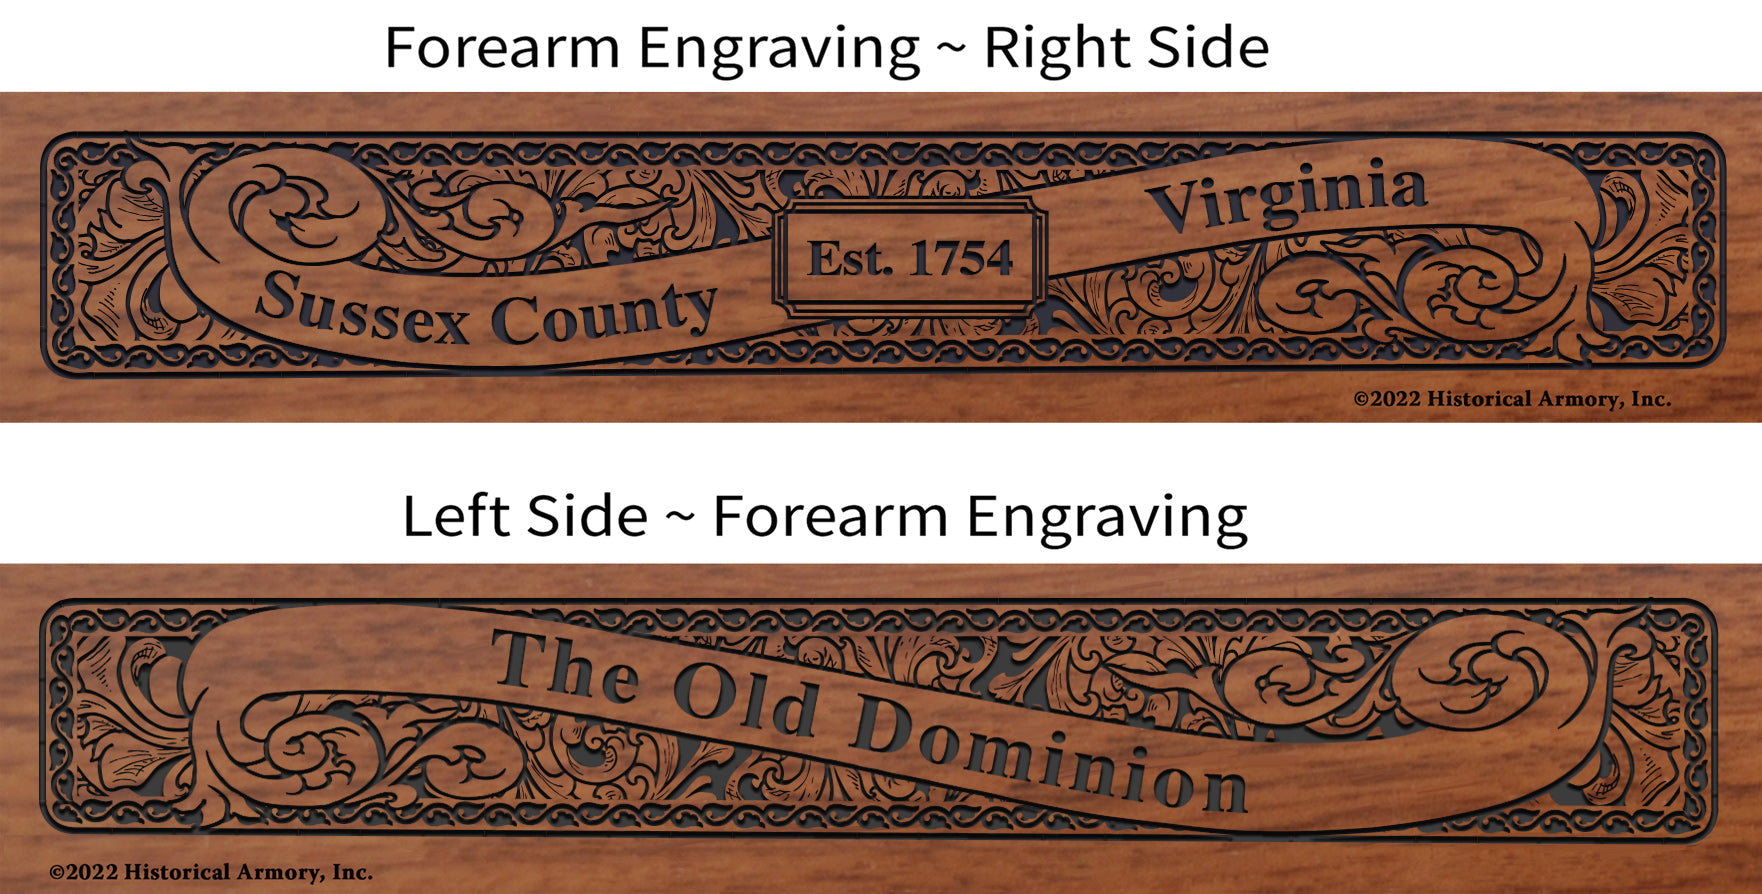 Sussex County Virginia Engraved Rifle Forearm